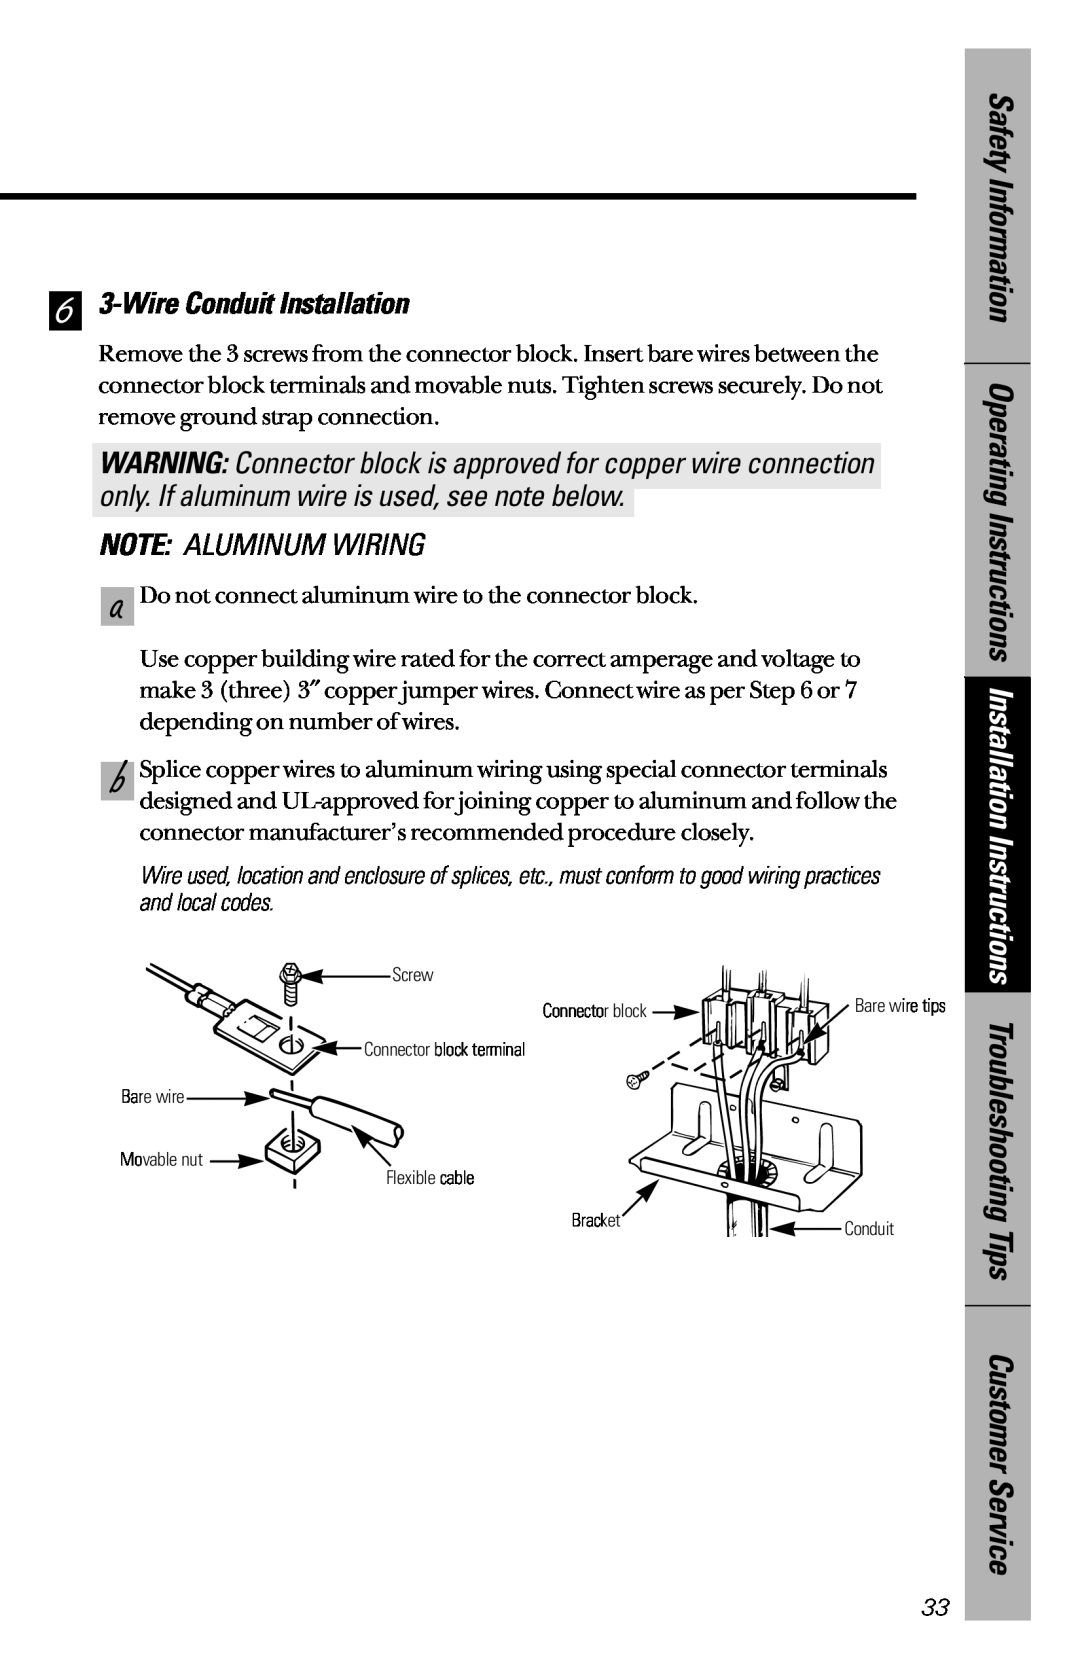 Hotpoint RB632, RB533, RB526, RB536, RB525 owner manual 6 3-Wire Conduit Installation, Note Aluminum Wiring 